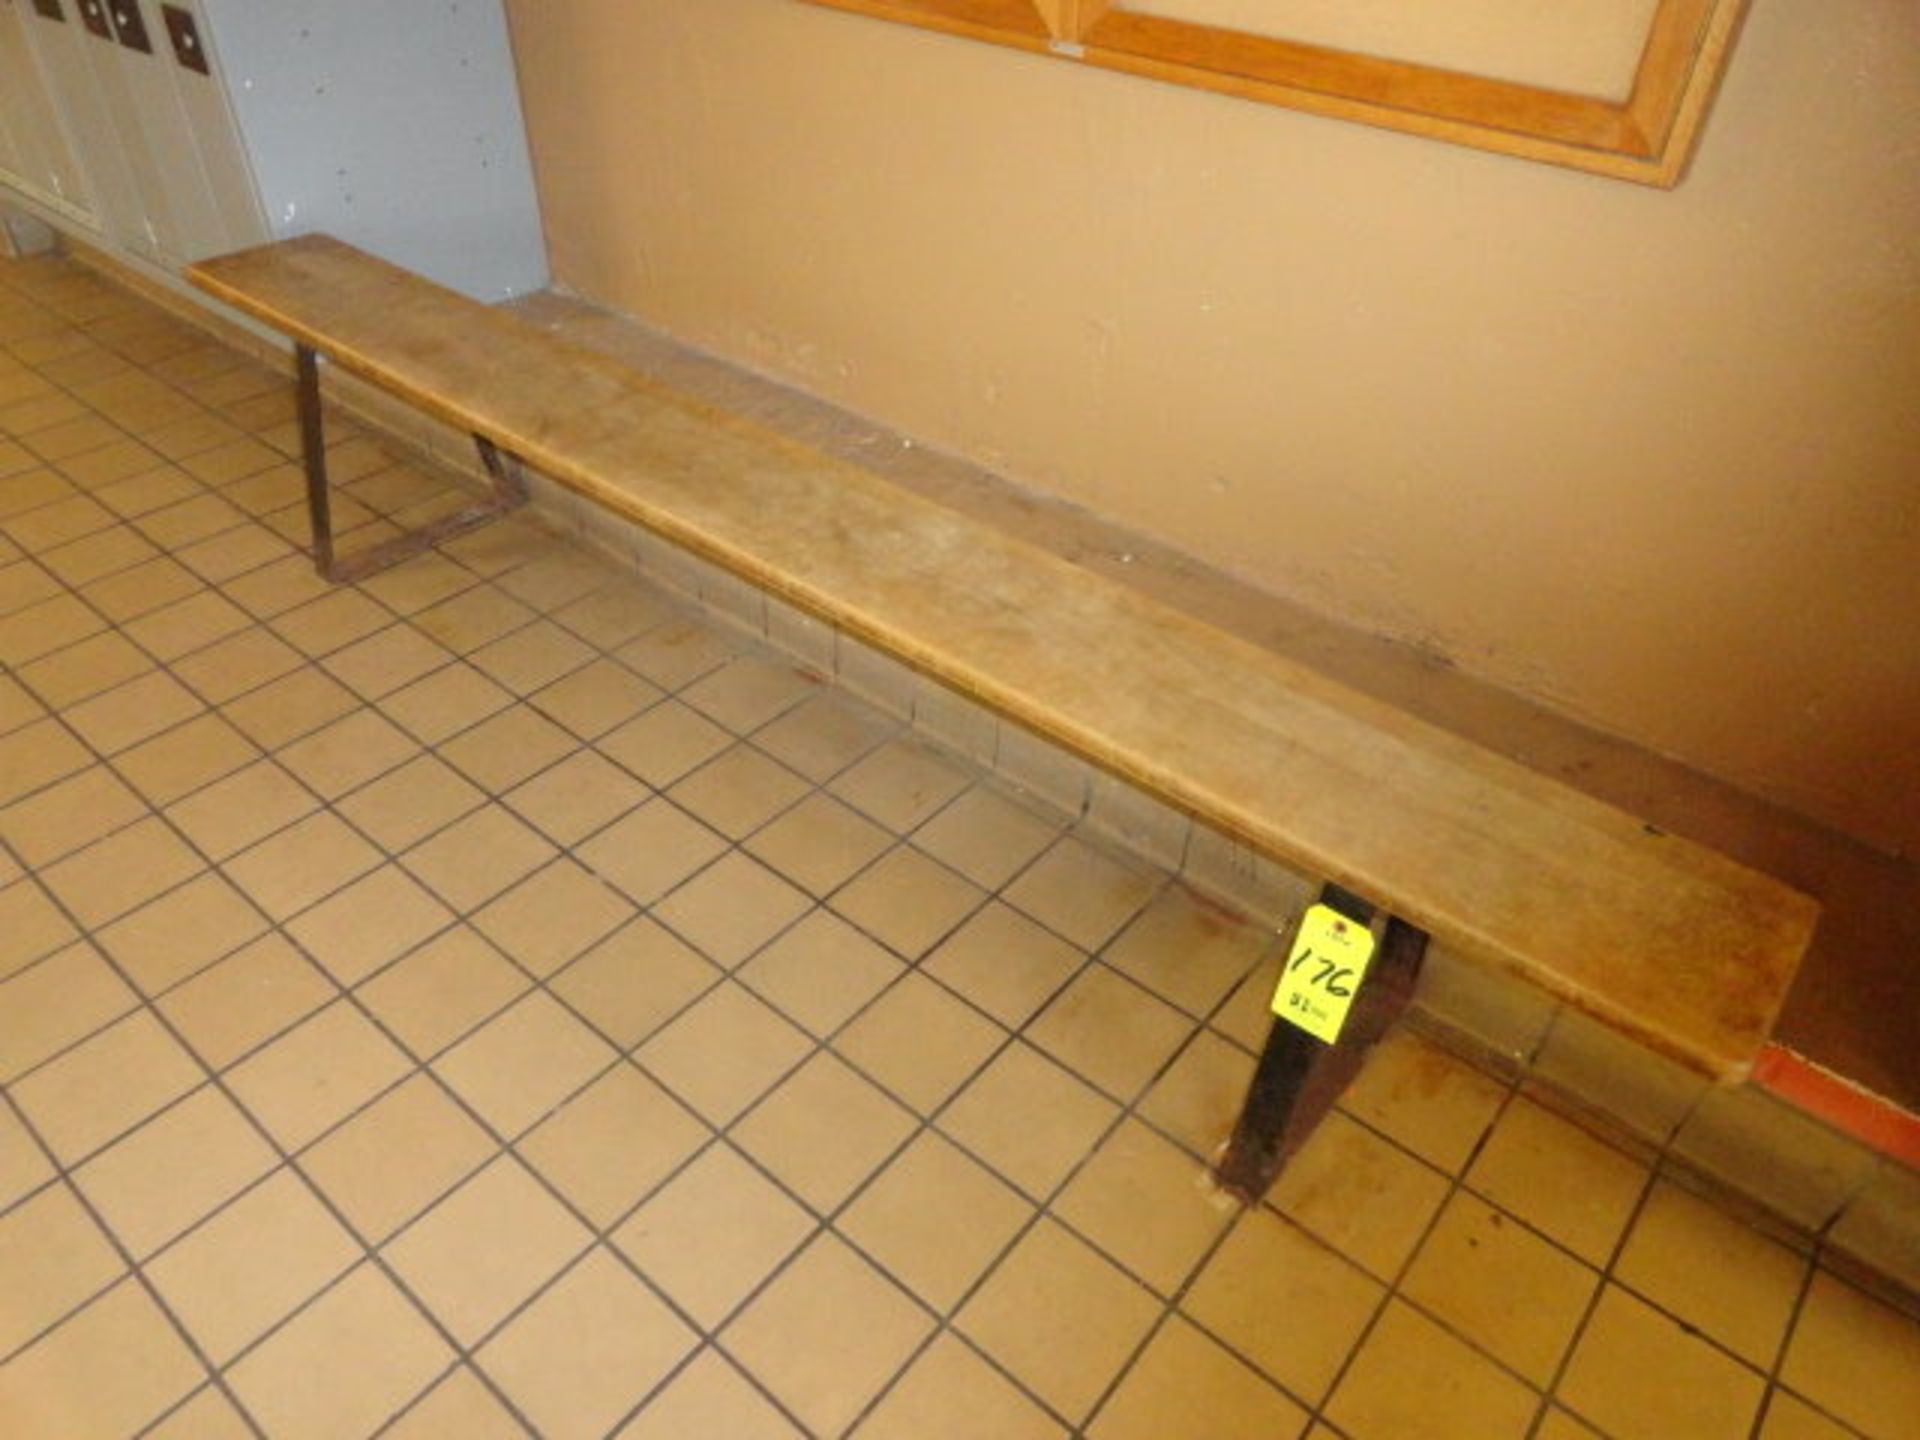 Wood Bench, 8', employee hallway, ($30.00 Required Loading Fee- Rigger: Nebraska Stainless - Norm